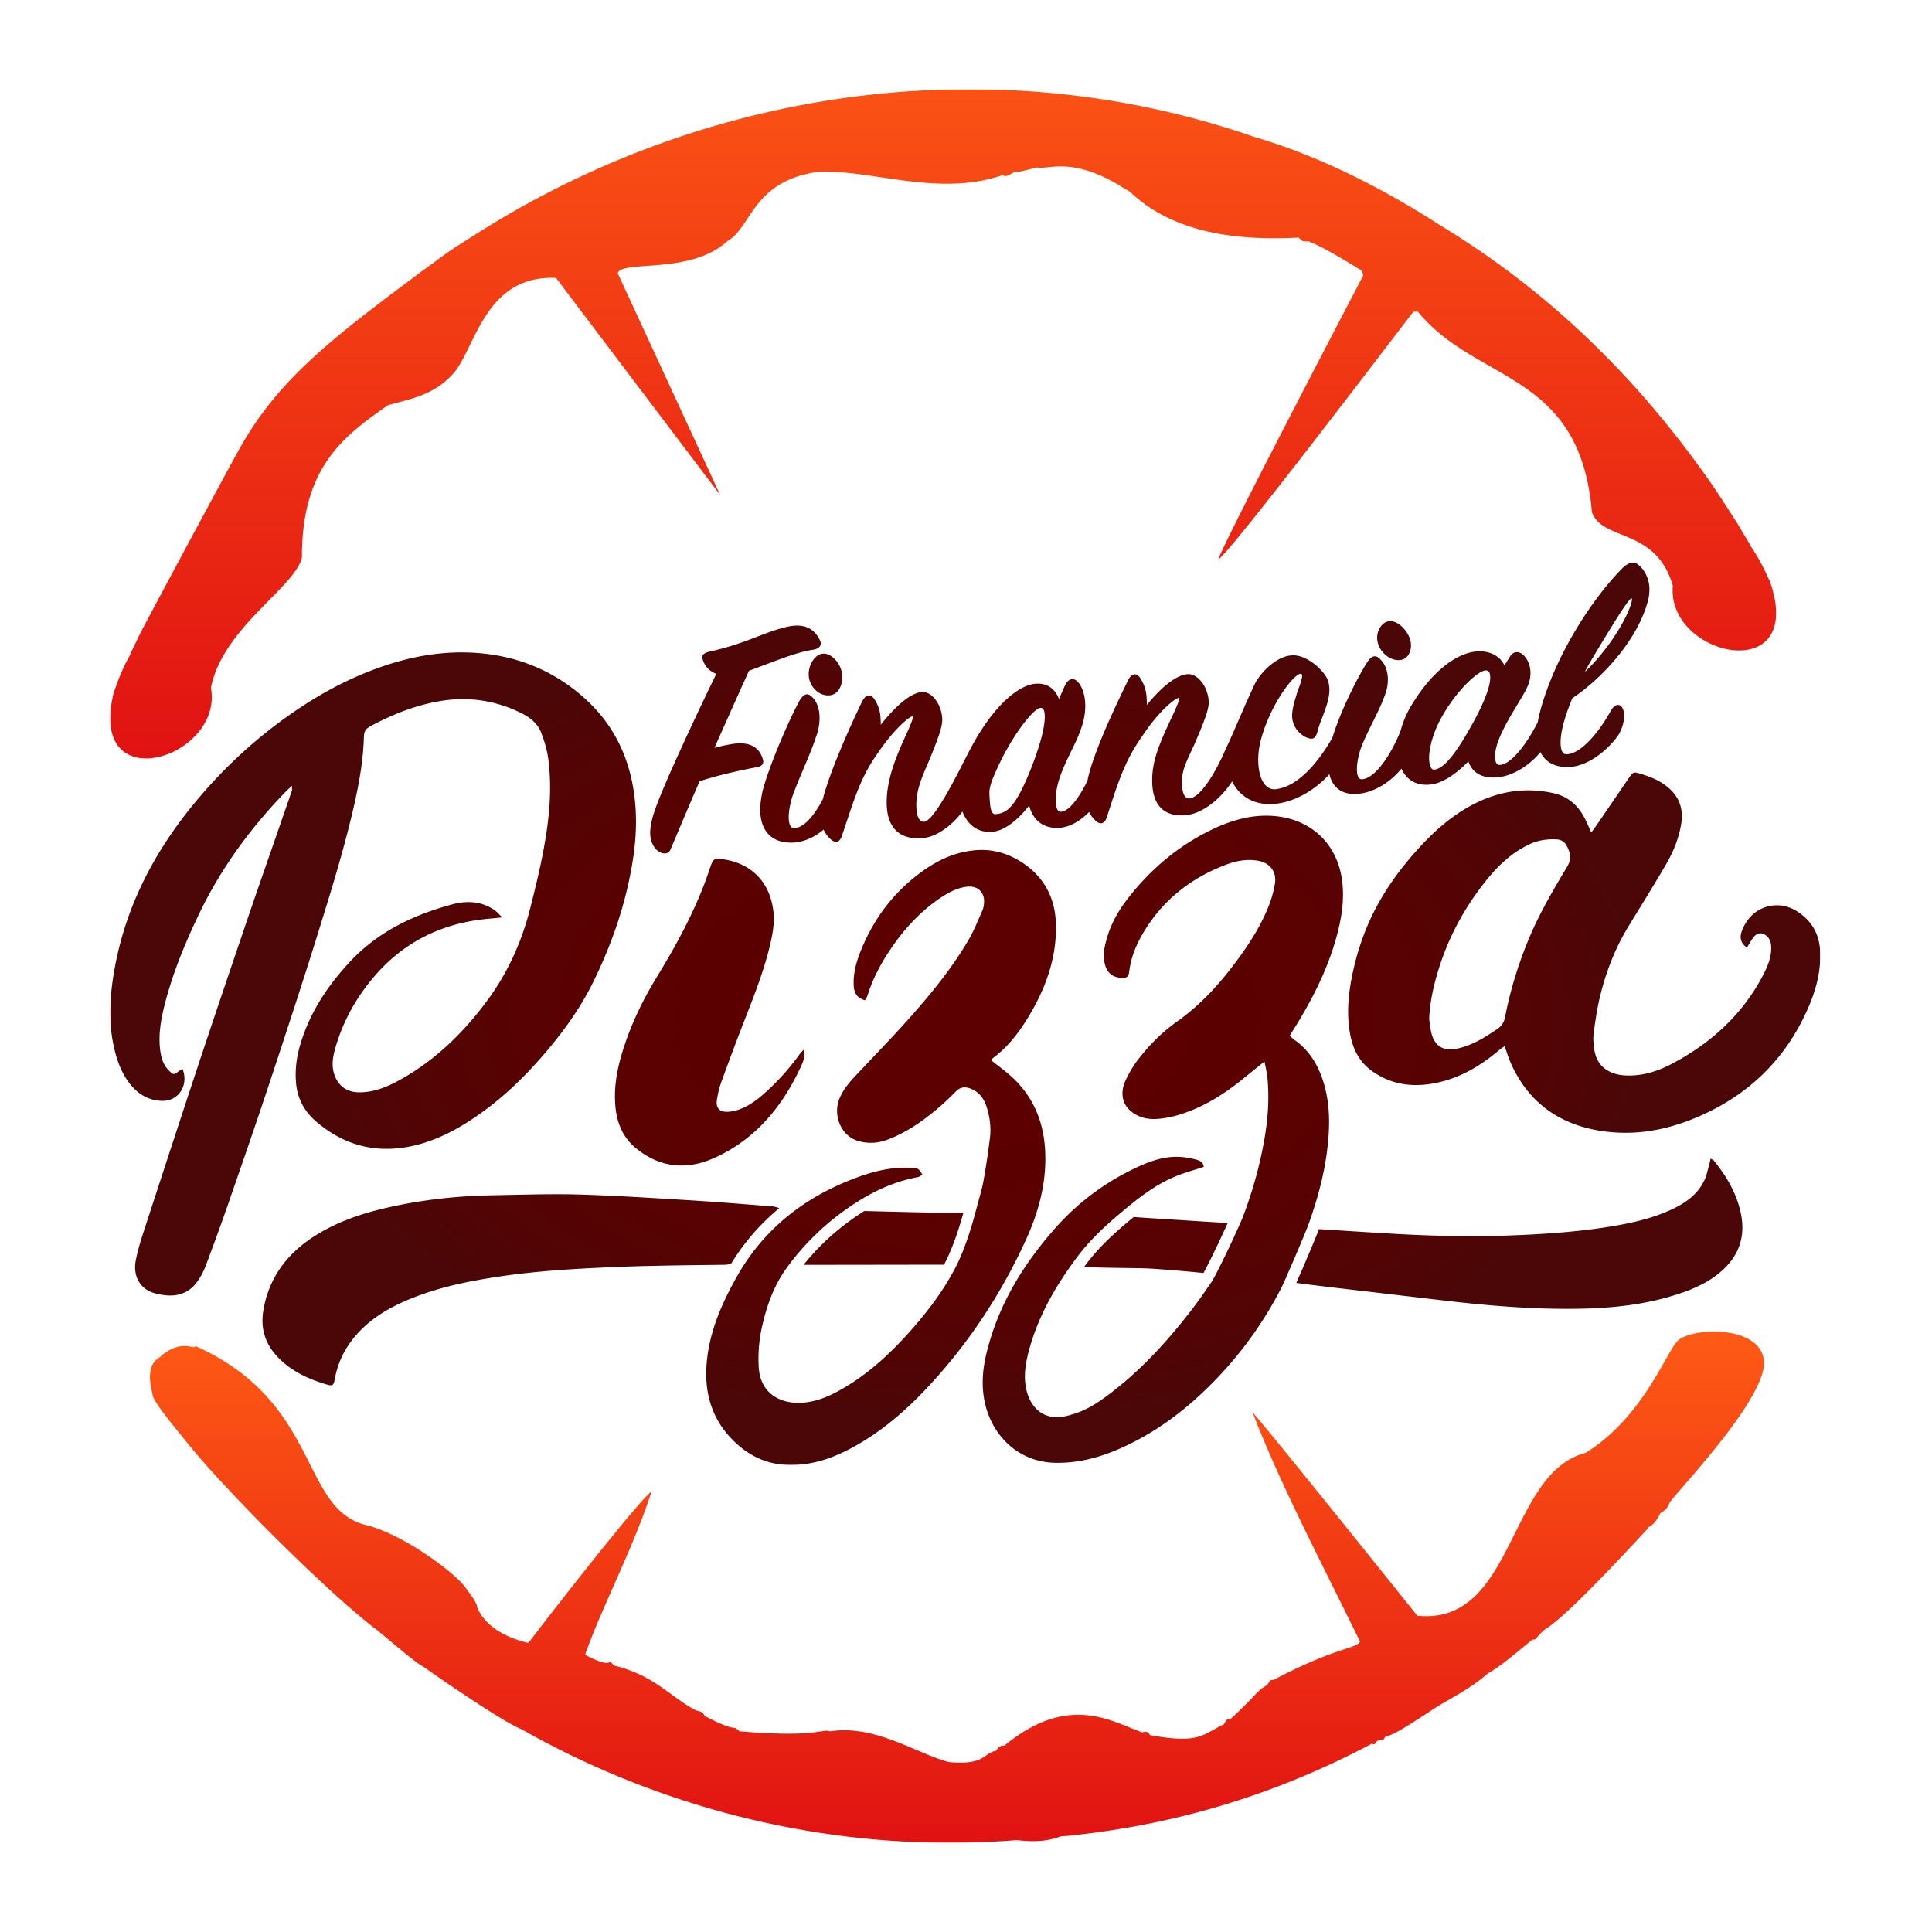 Best of Financial Pizza From the rule of 100 to using sit-coms to help plan for retirement, it's a full house this week.